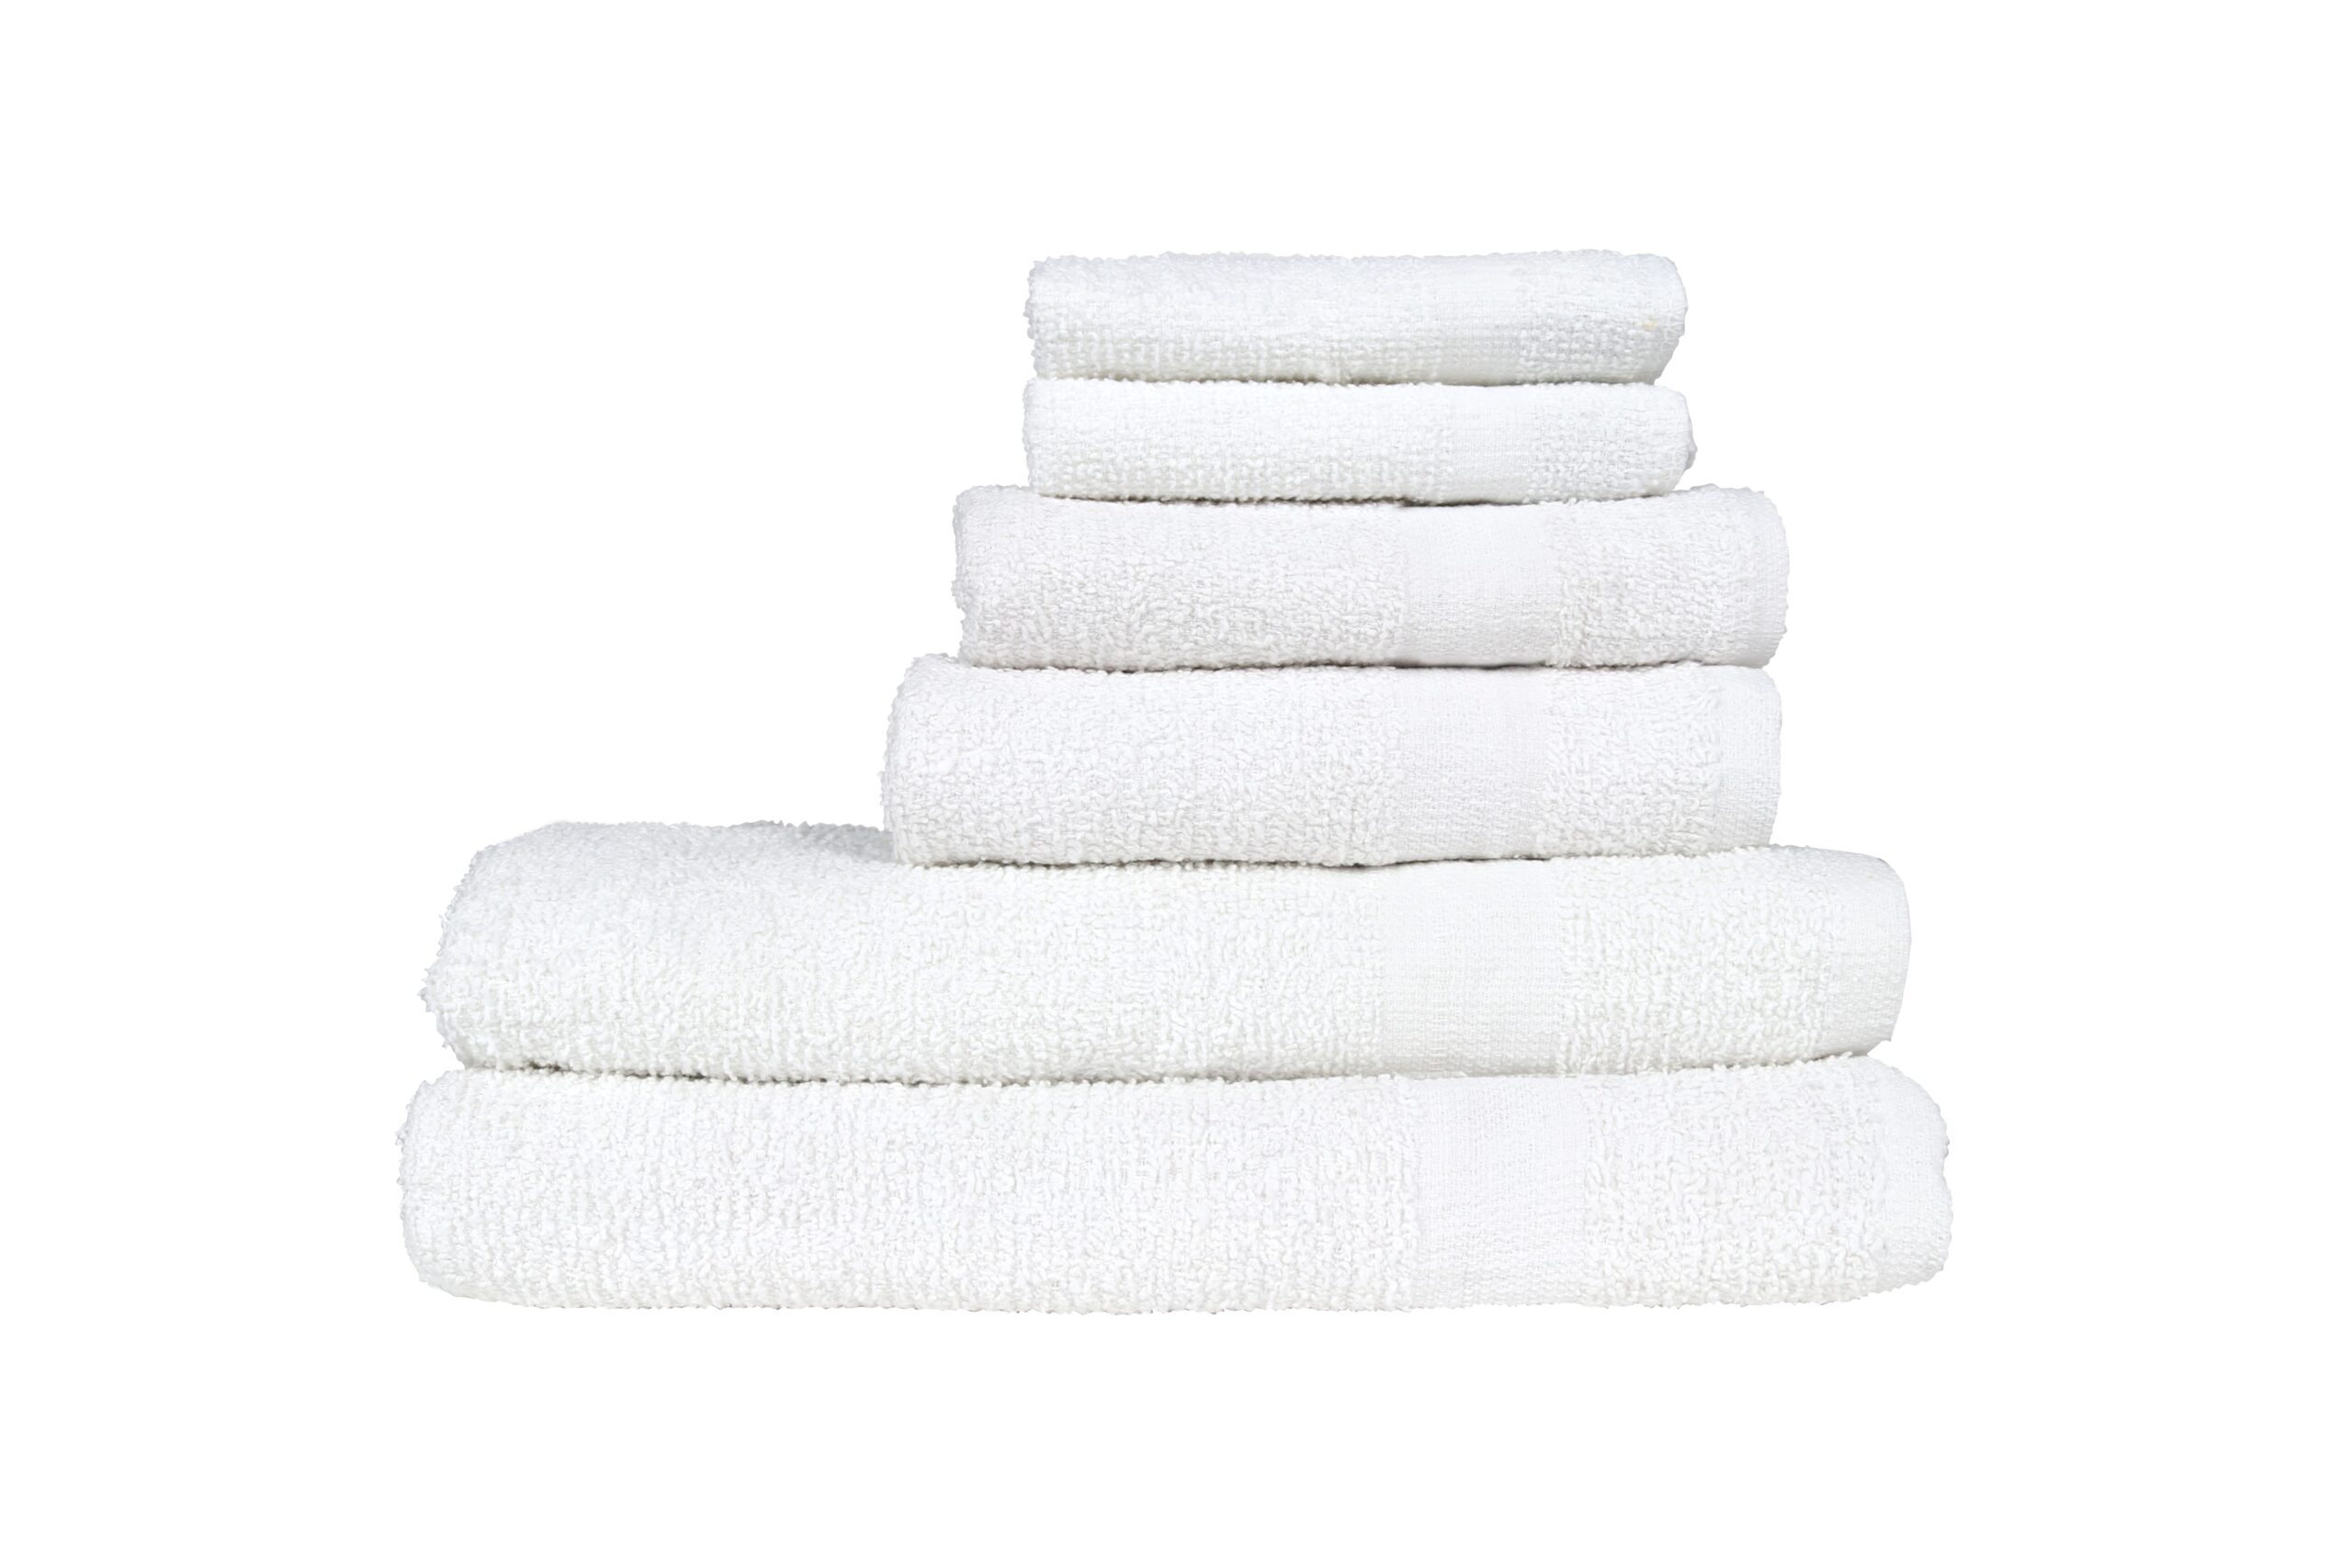 Wholesale Plain White Hotel Towels Manufacturer and Supplier